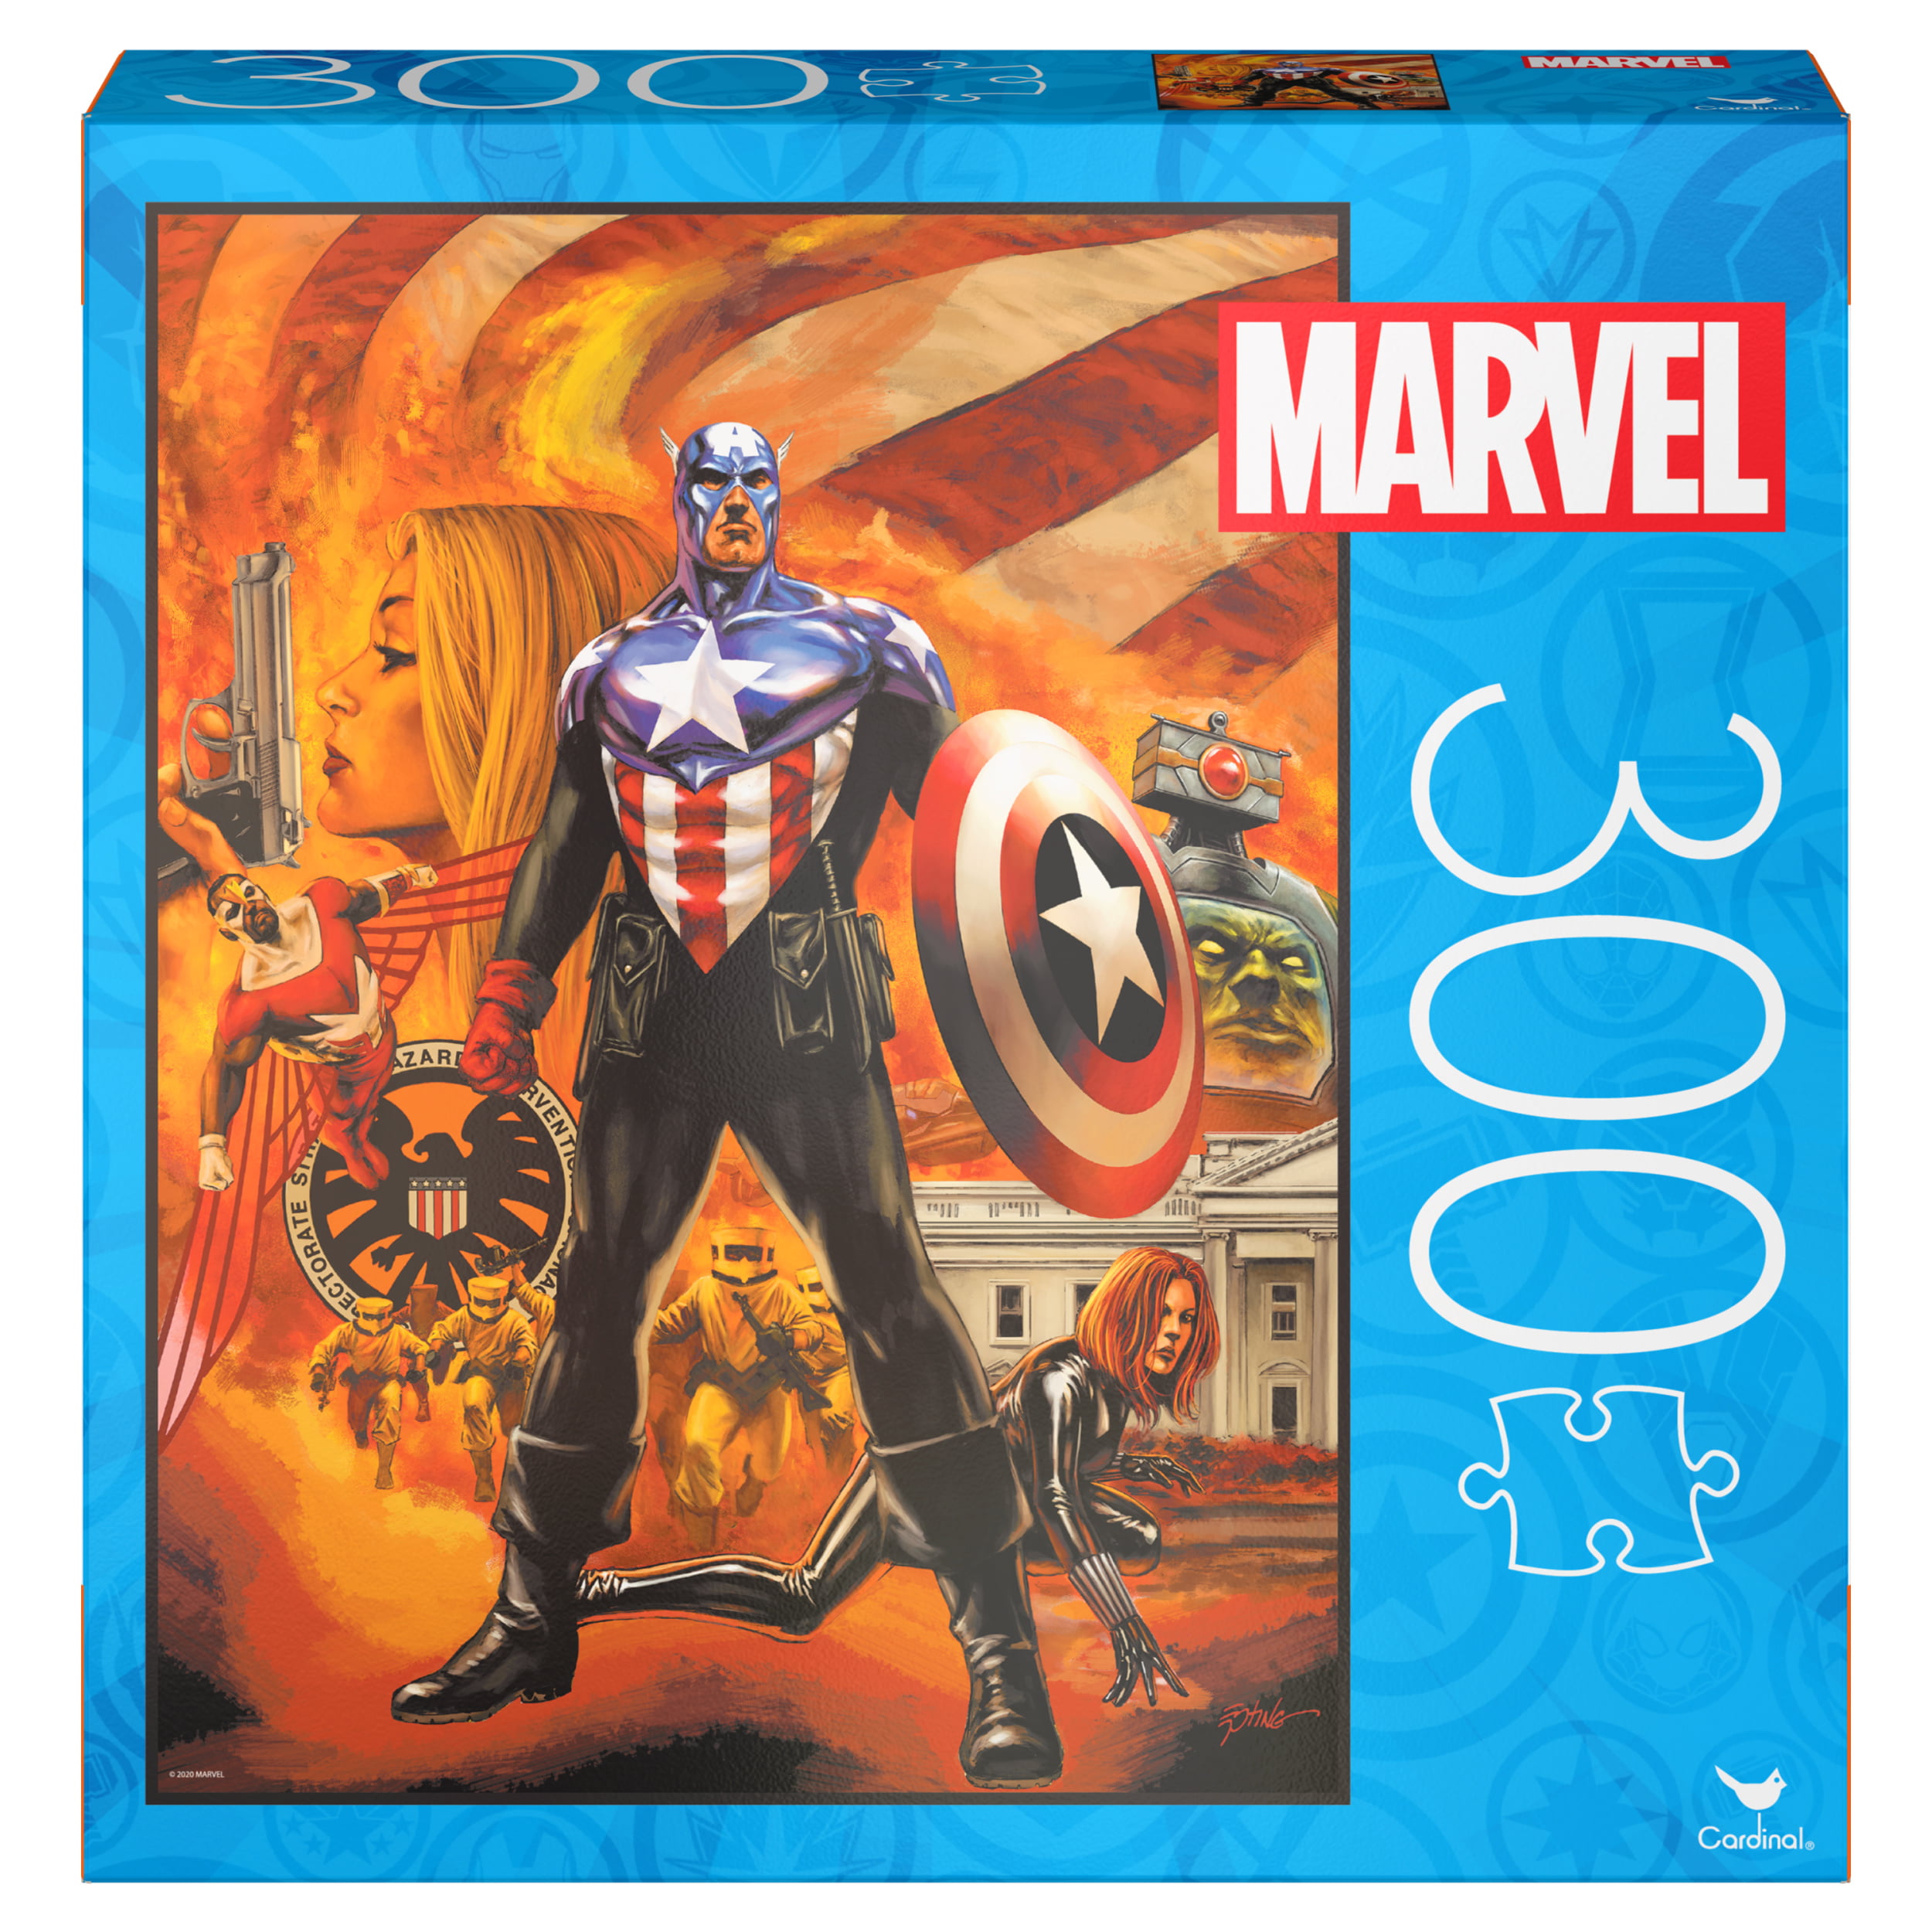 Marvel Avengers Team Captain America Jigsaw Puzzle 1000 Pieces Small Size NEW!